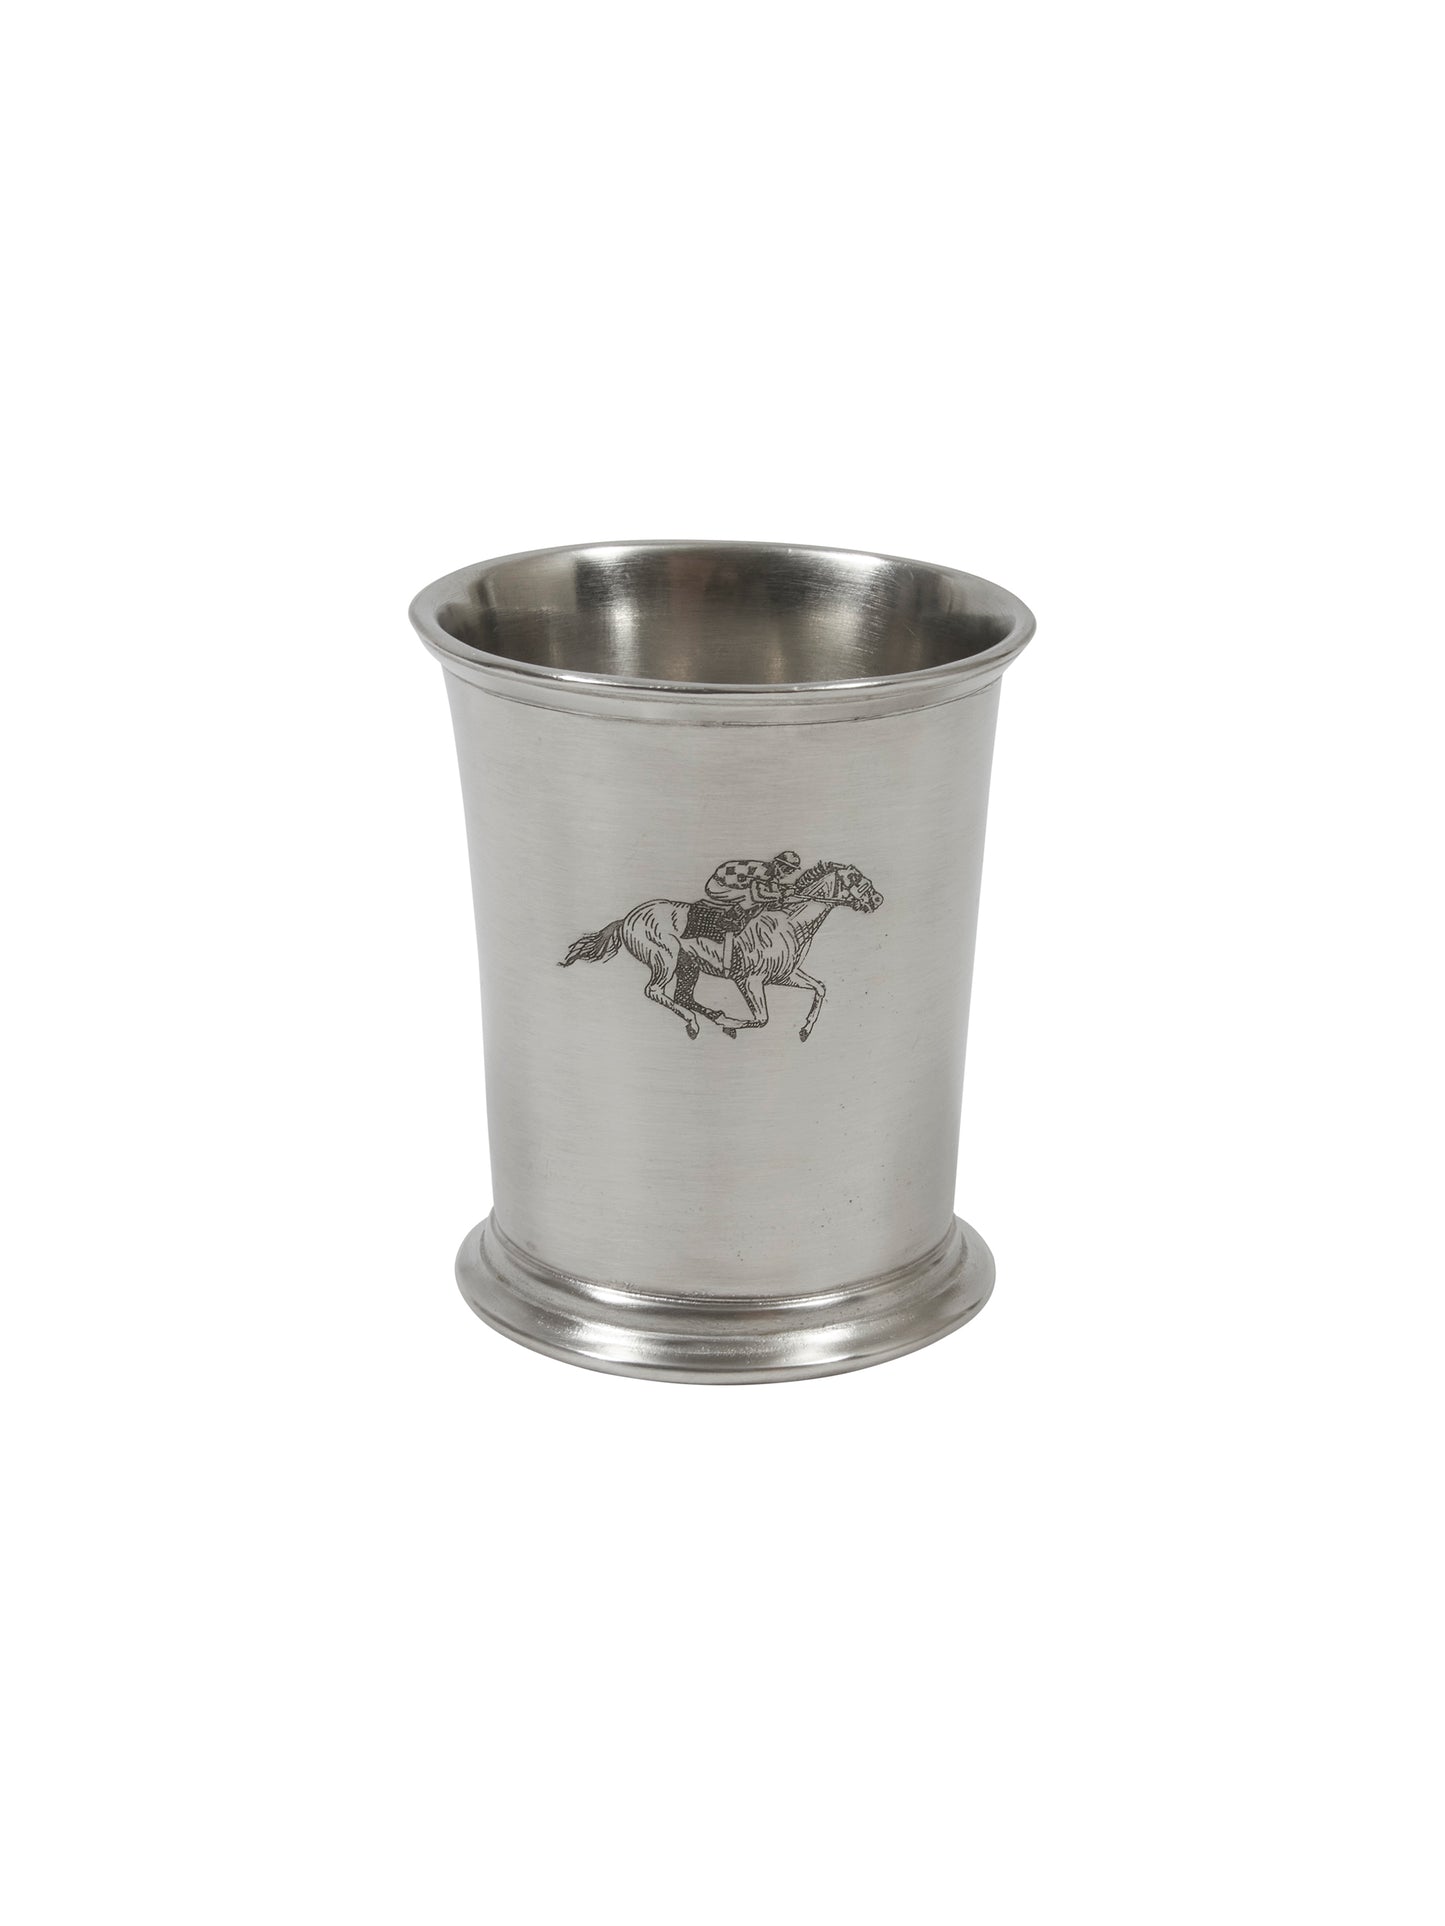 MATCH Pewter Derby Julep Cup Weston Table